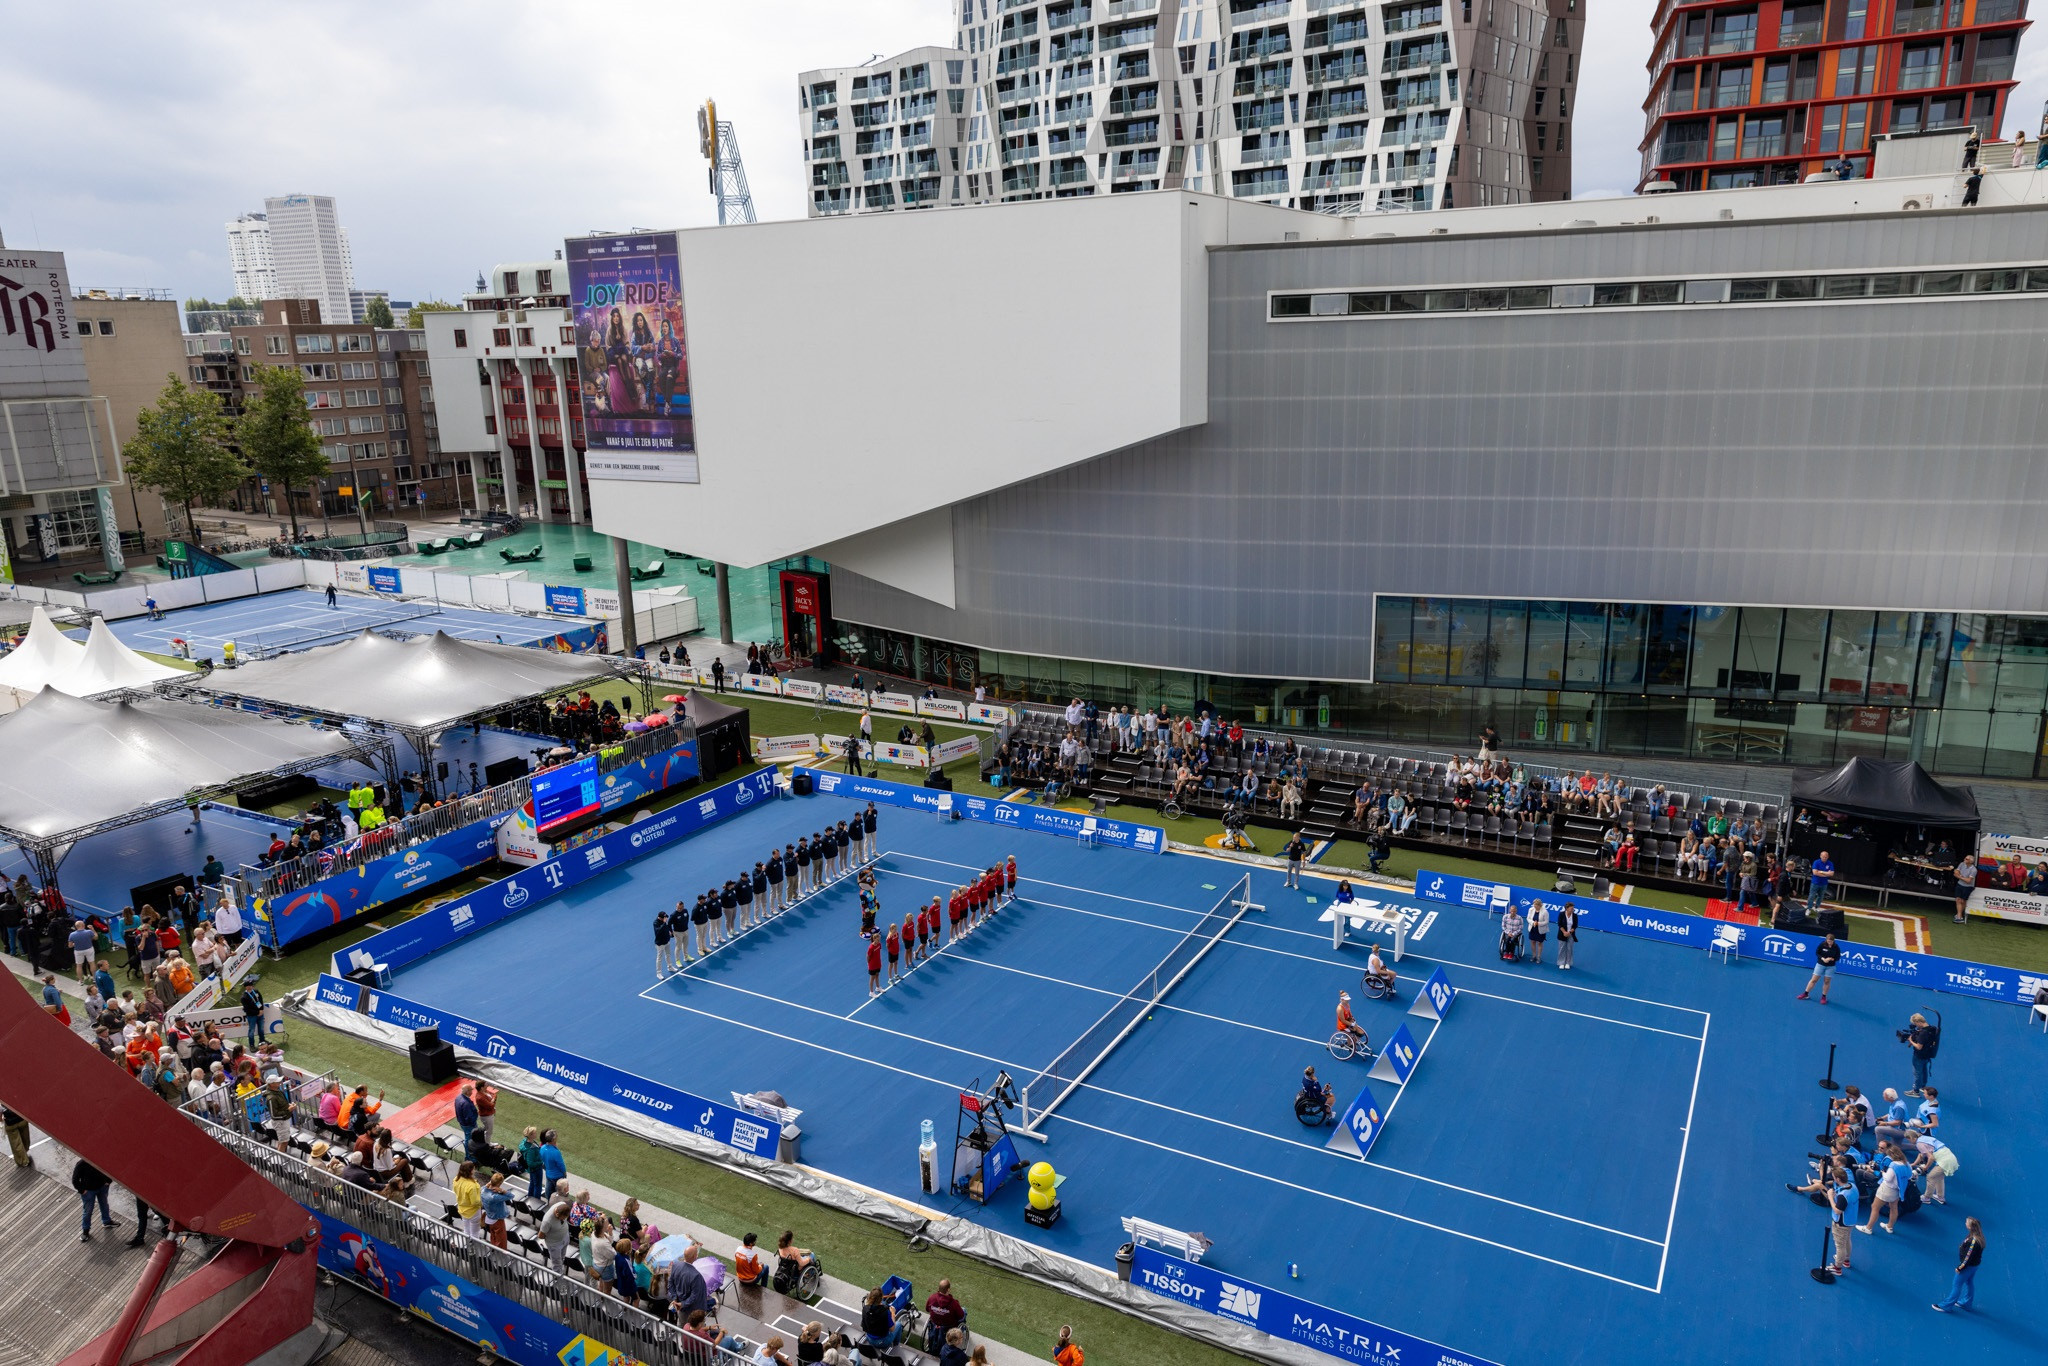 Schouwburgplein in Rotterdam was the stage for the final day of boccia and wheelchair tennis action ©EPC